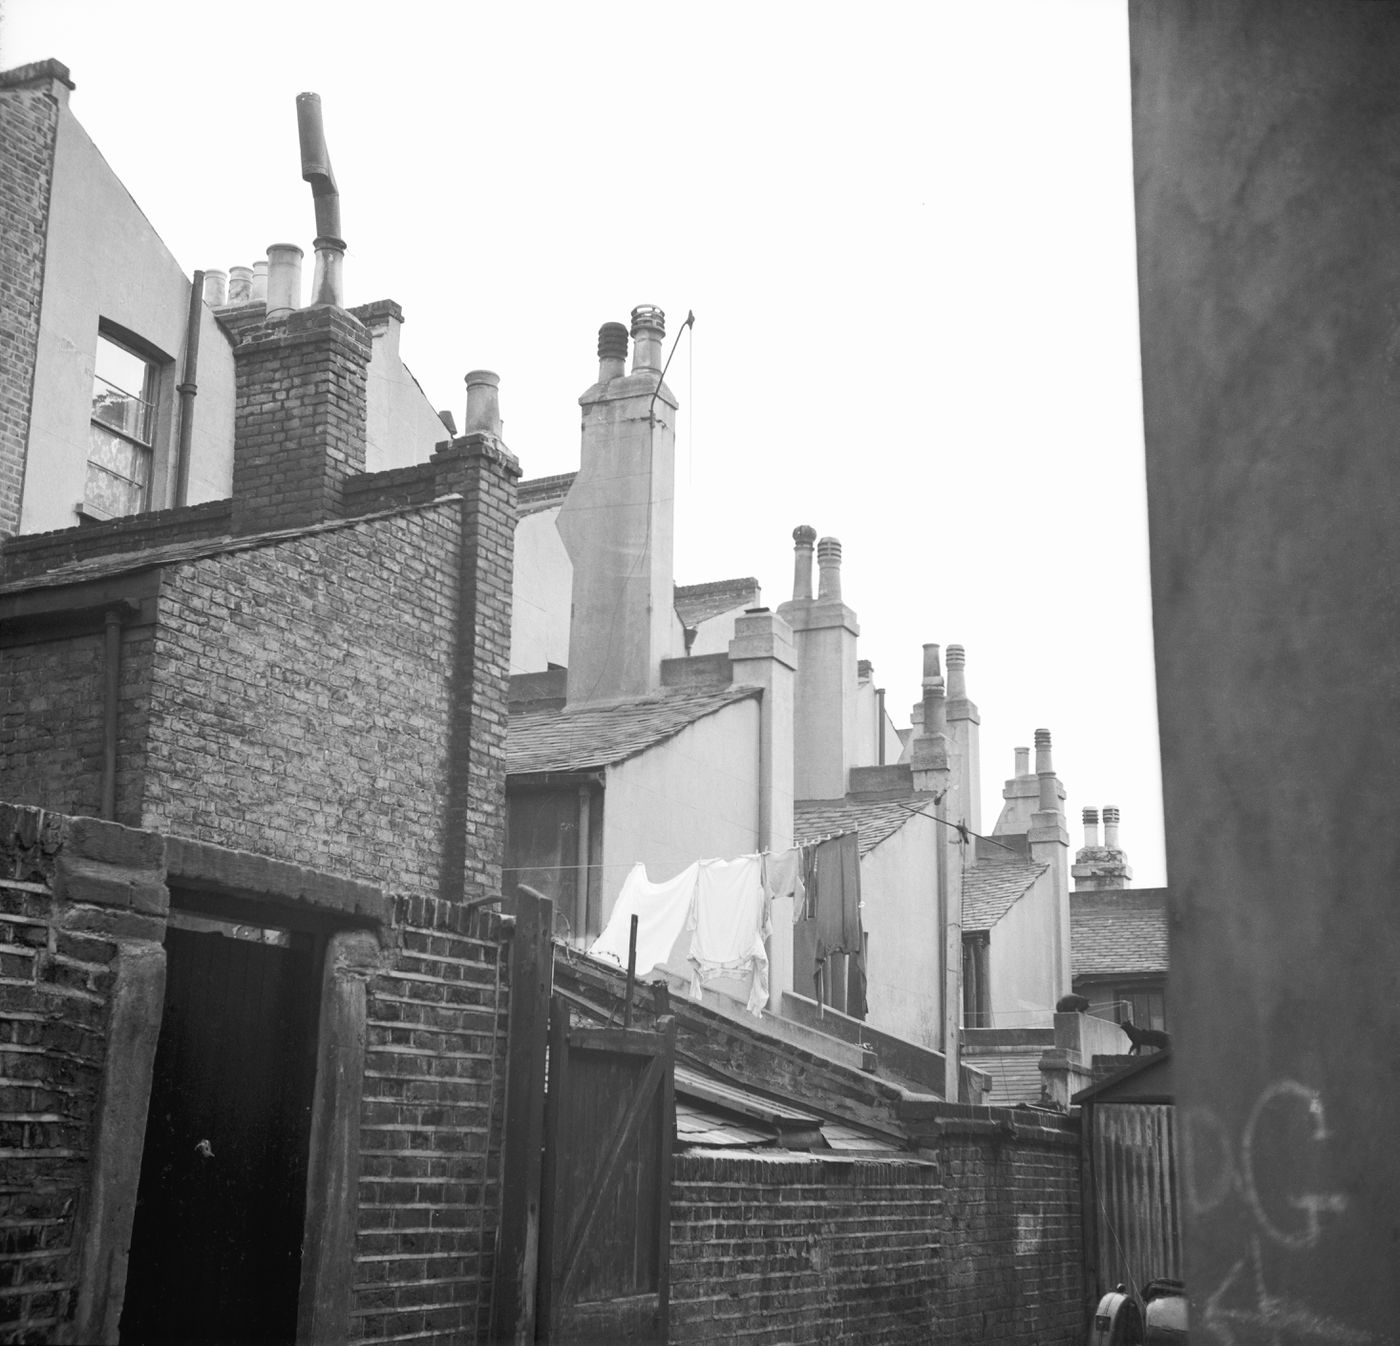 View of backs of houses, from Stirling's personal photos file, Avenham, Preston, Lancashire, England